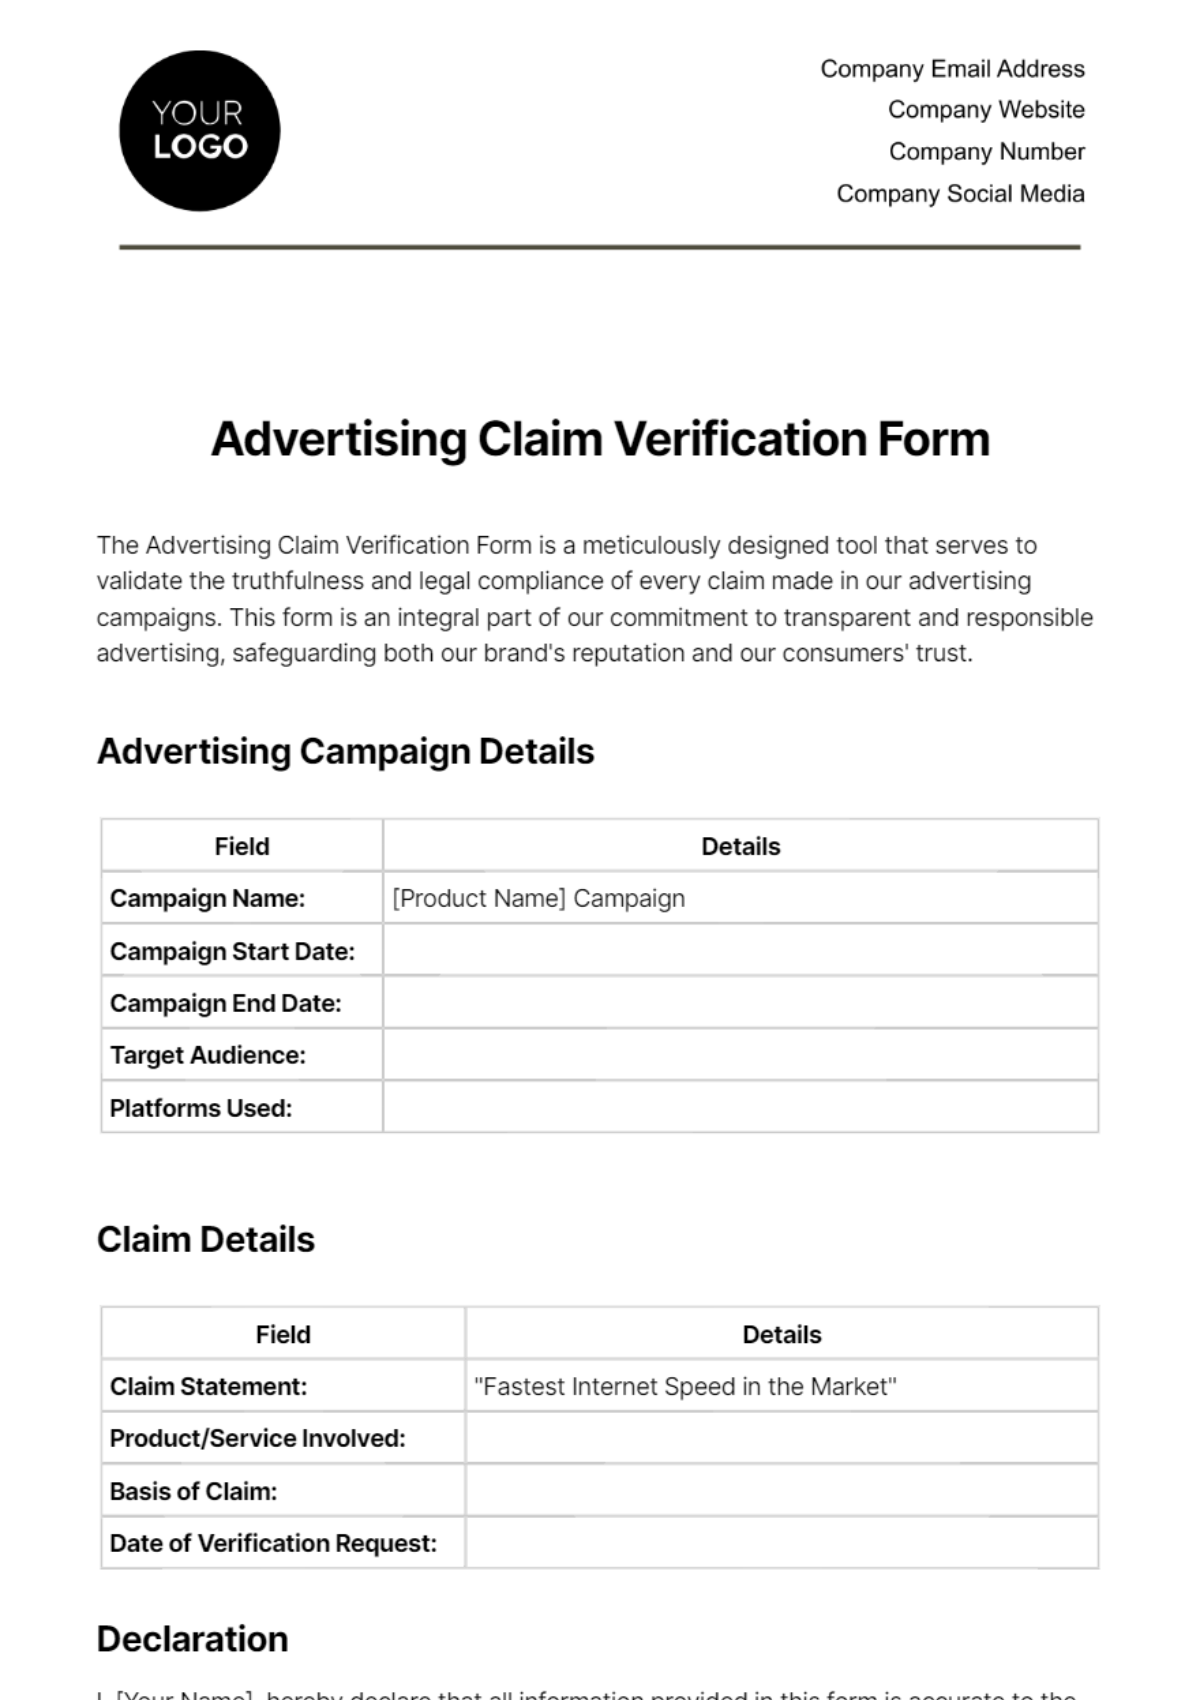 Free Advertising Claim Verification Form Template